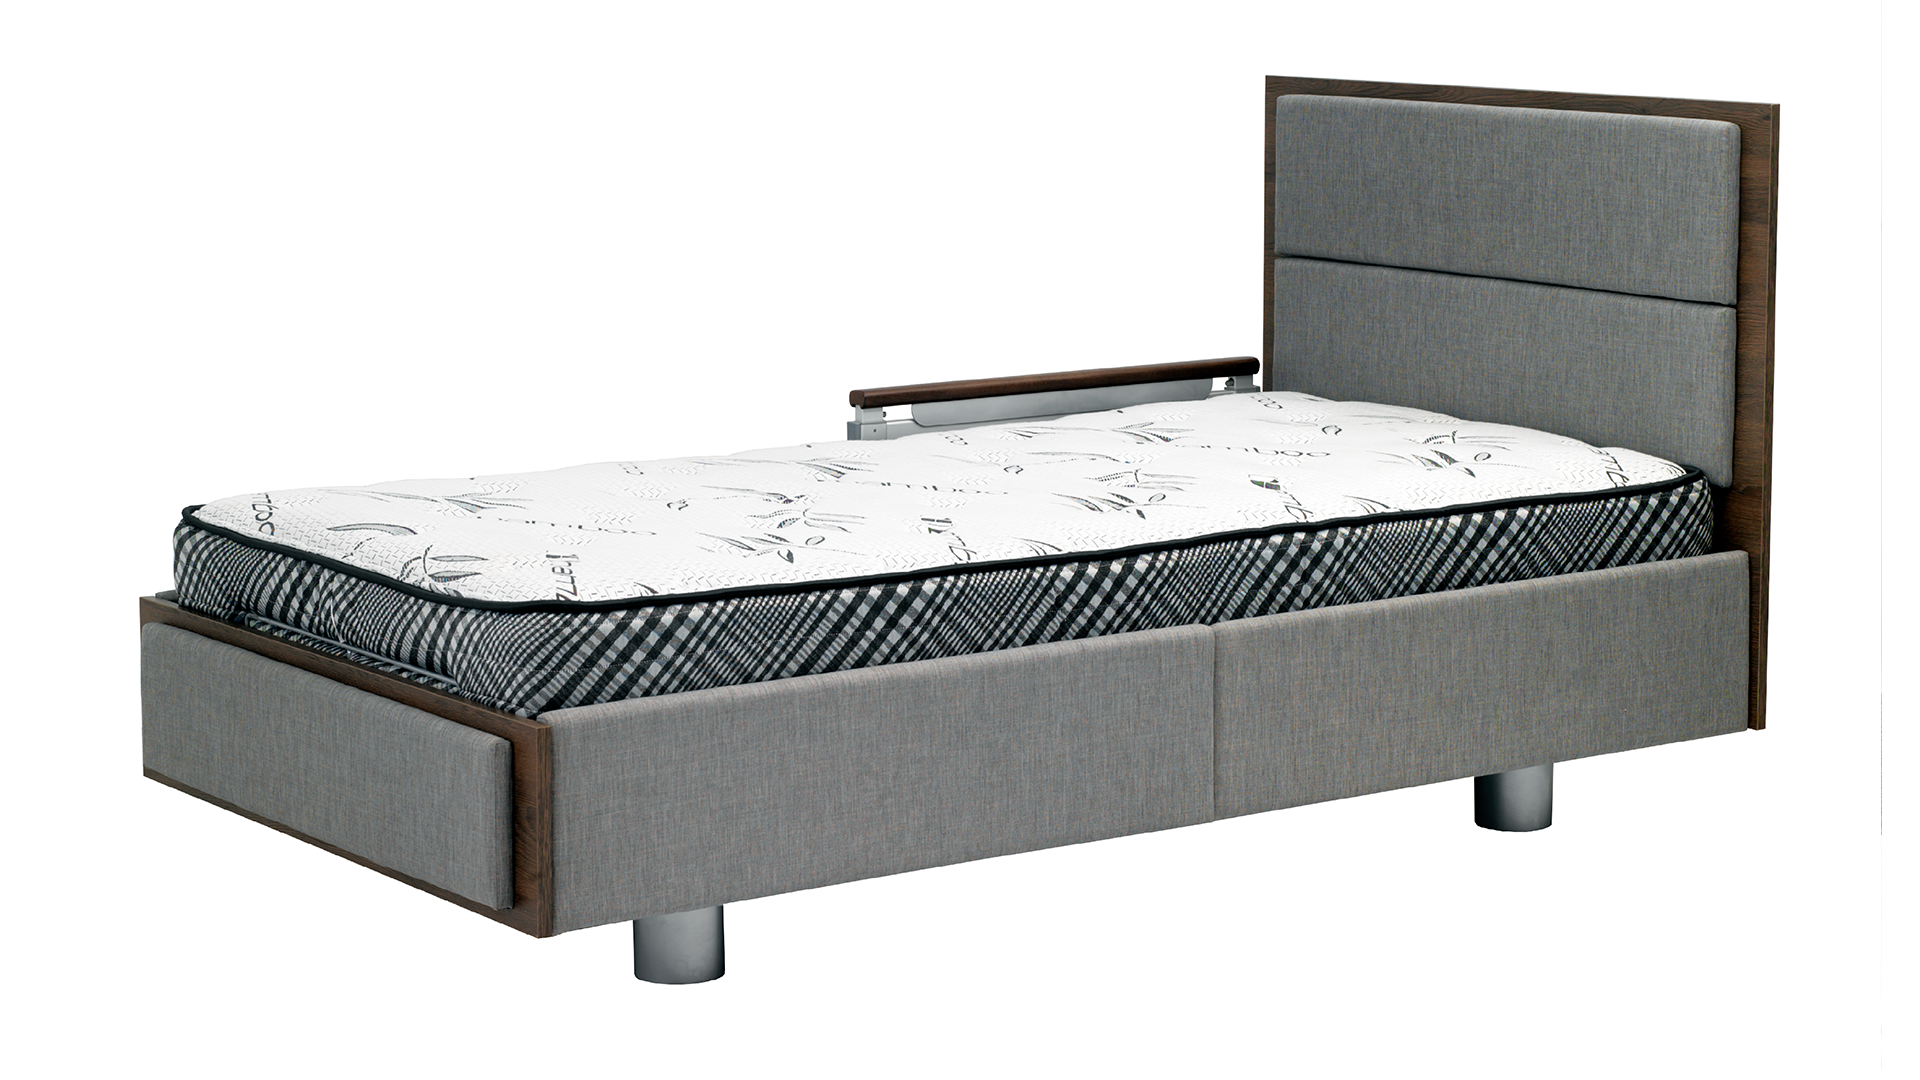 Modern single bed with a patterned mattress, gray upholstered frame and headboard, featuring a side storage drawer and metal legs, isolated on a white background.